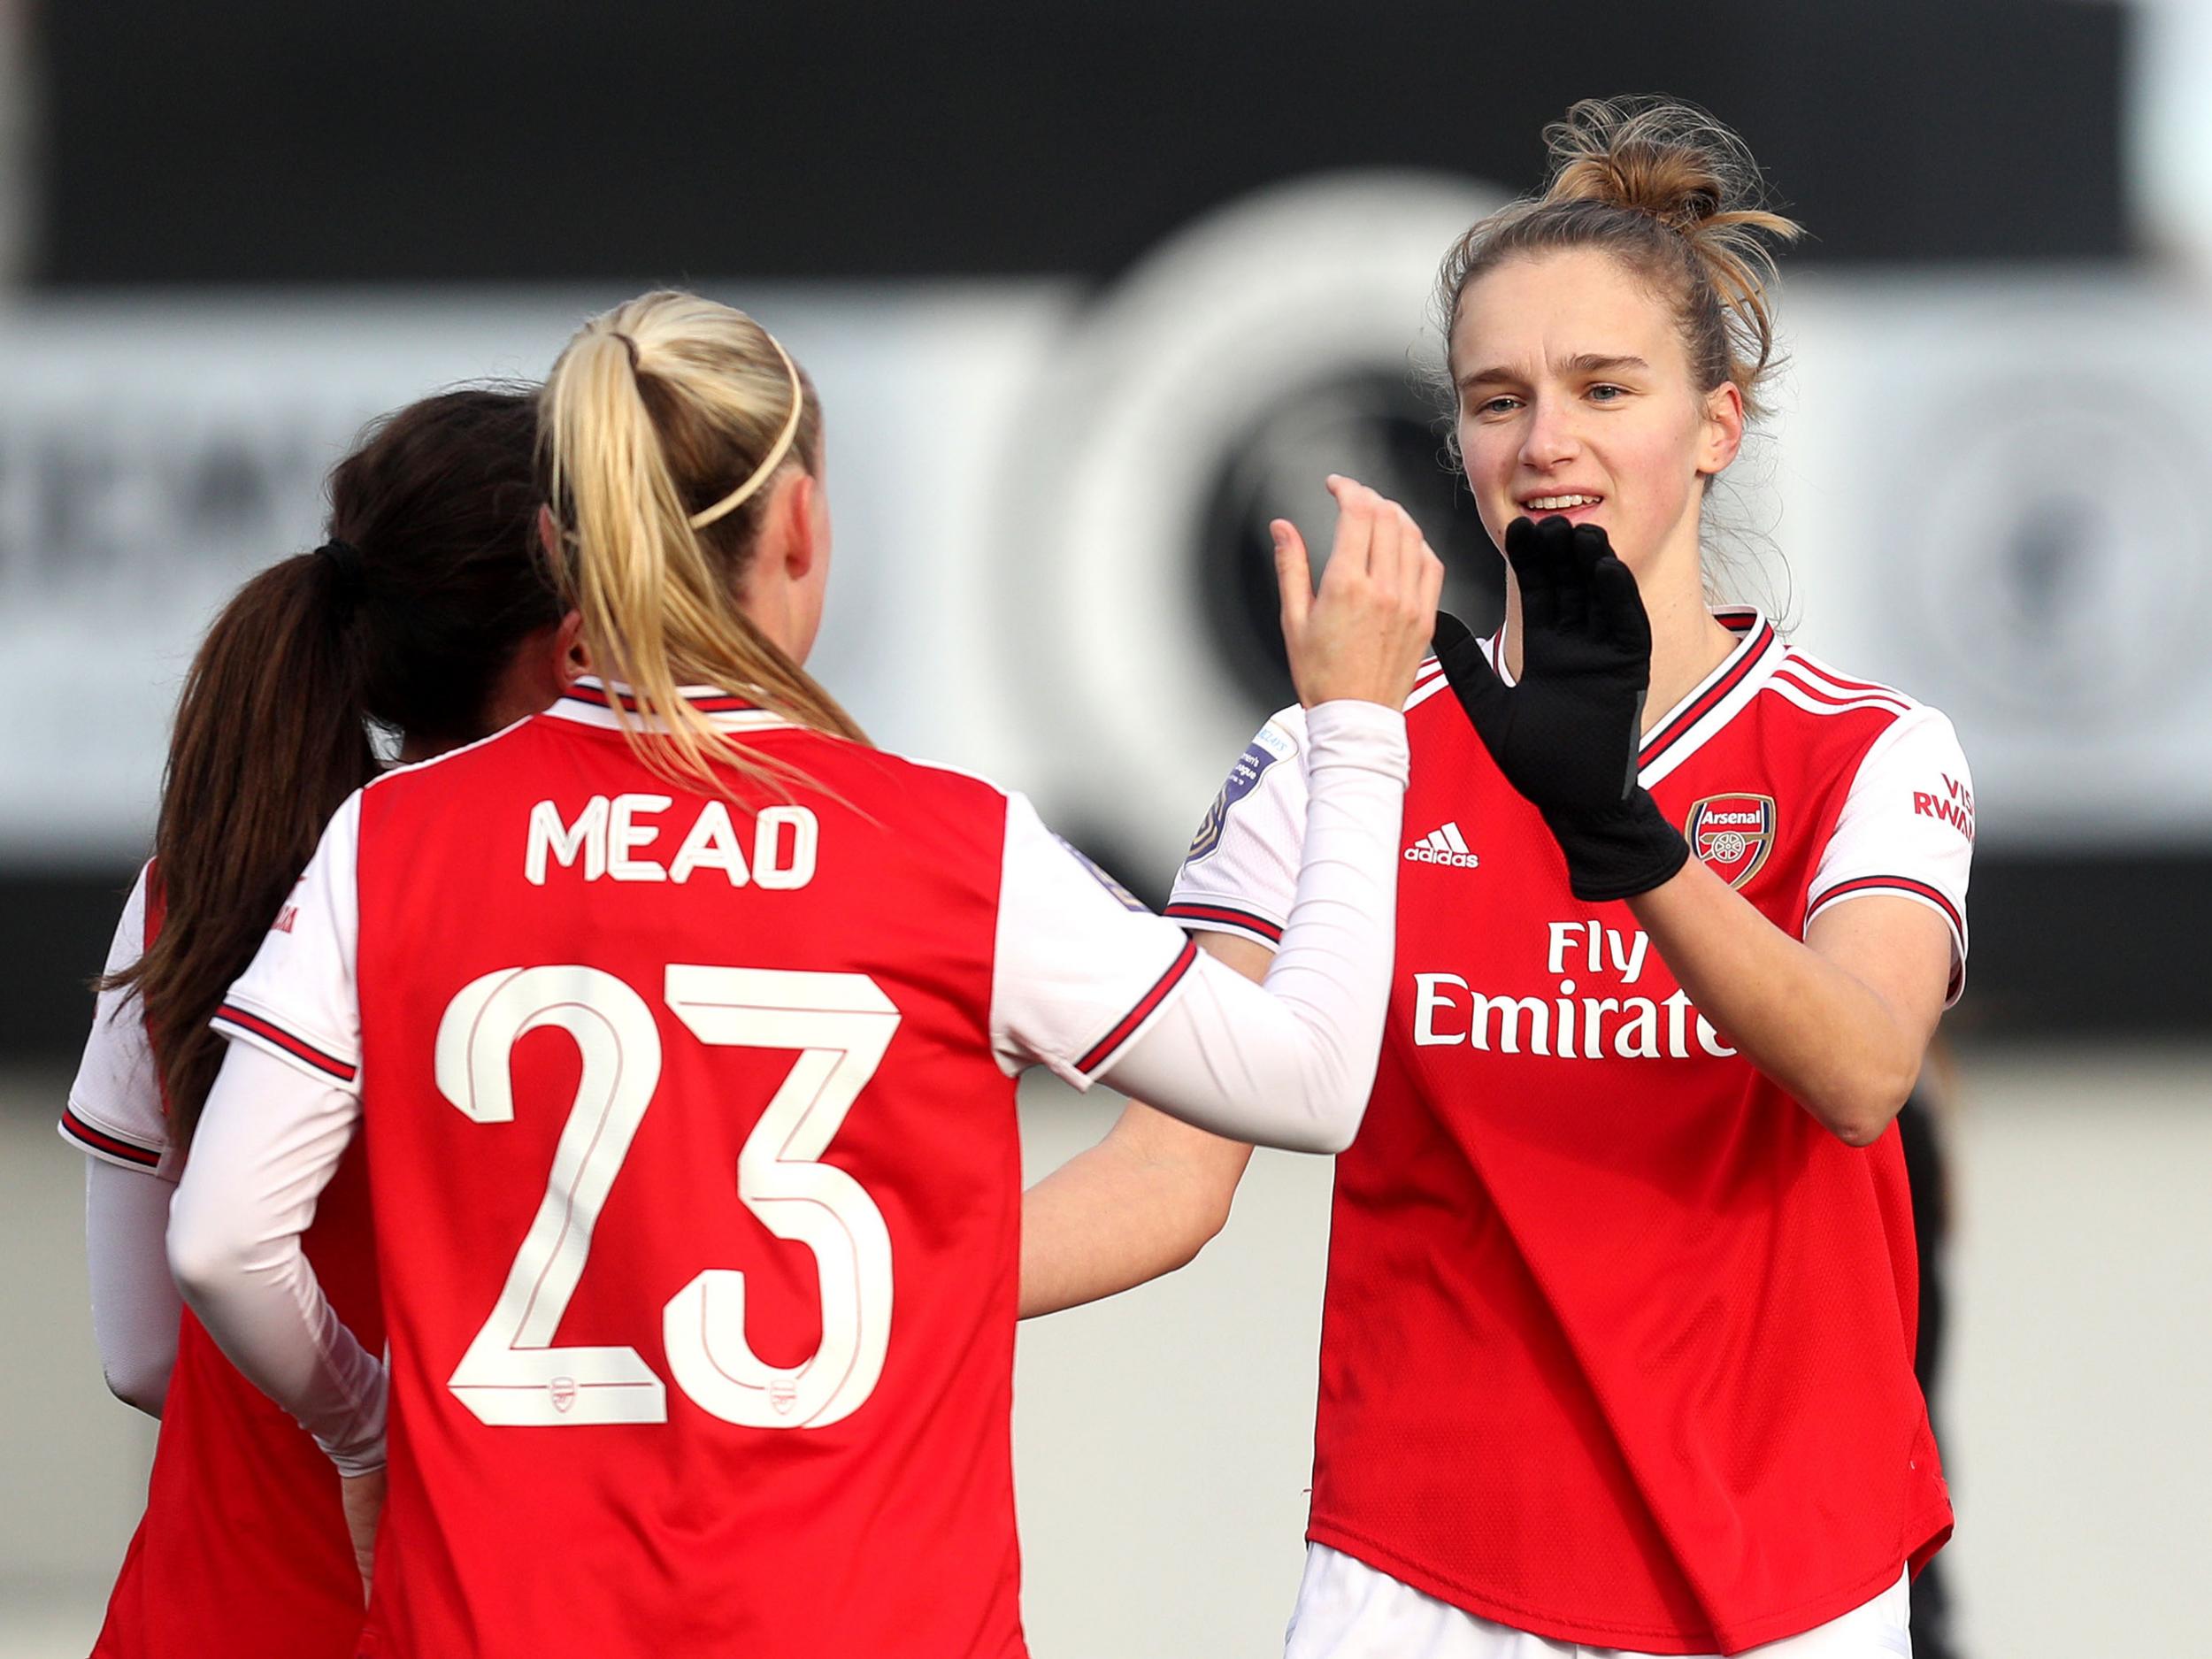 Arsenal set a new FA WSL record with a crushing 11-1 win against Bristol City